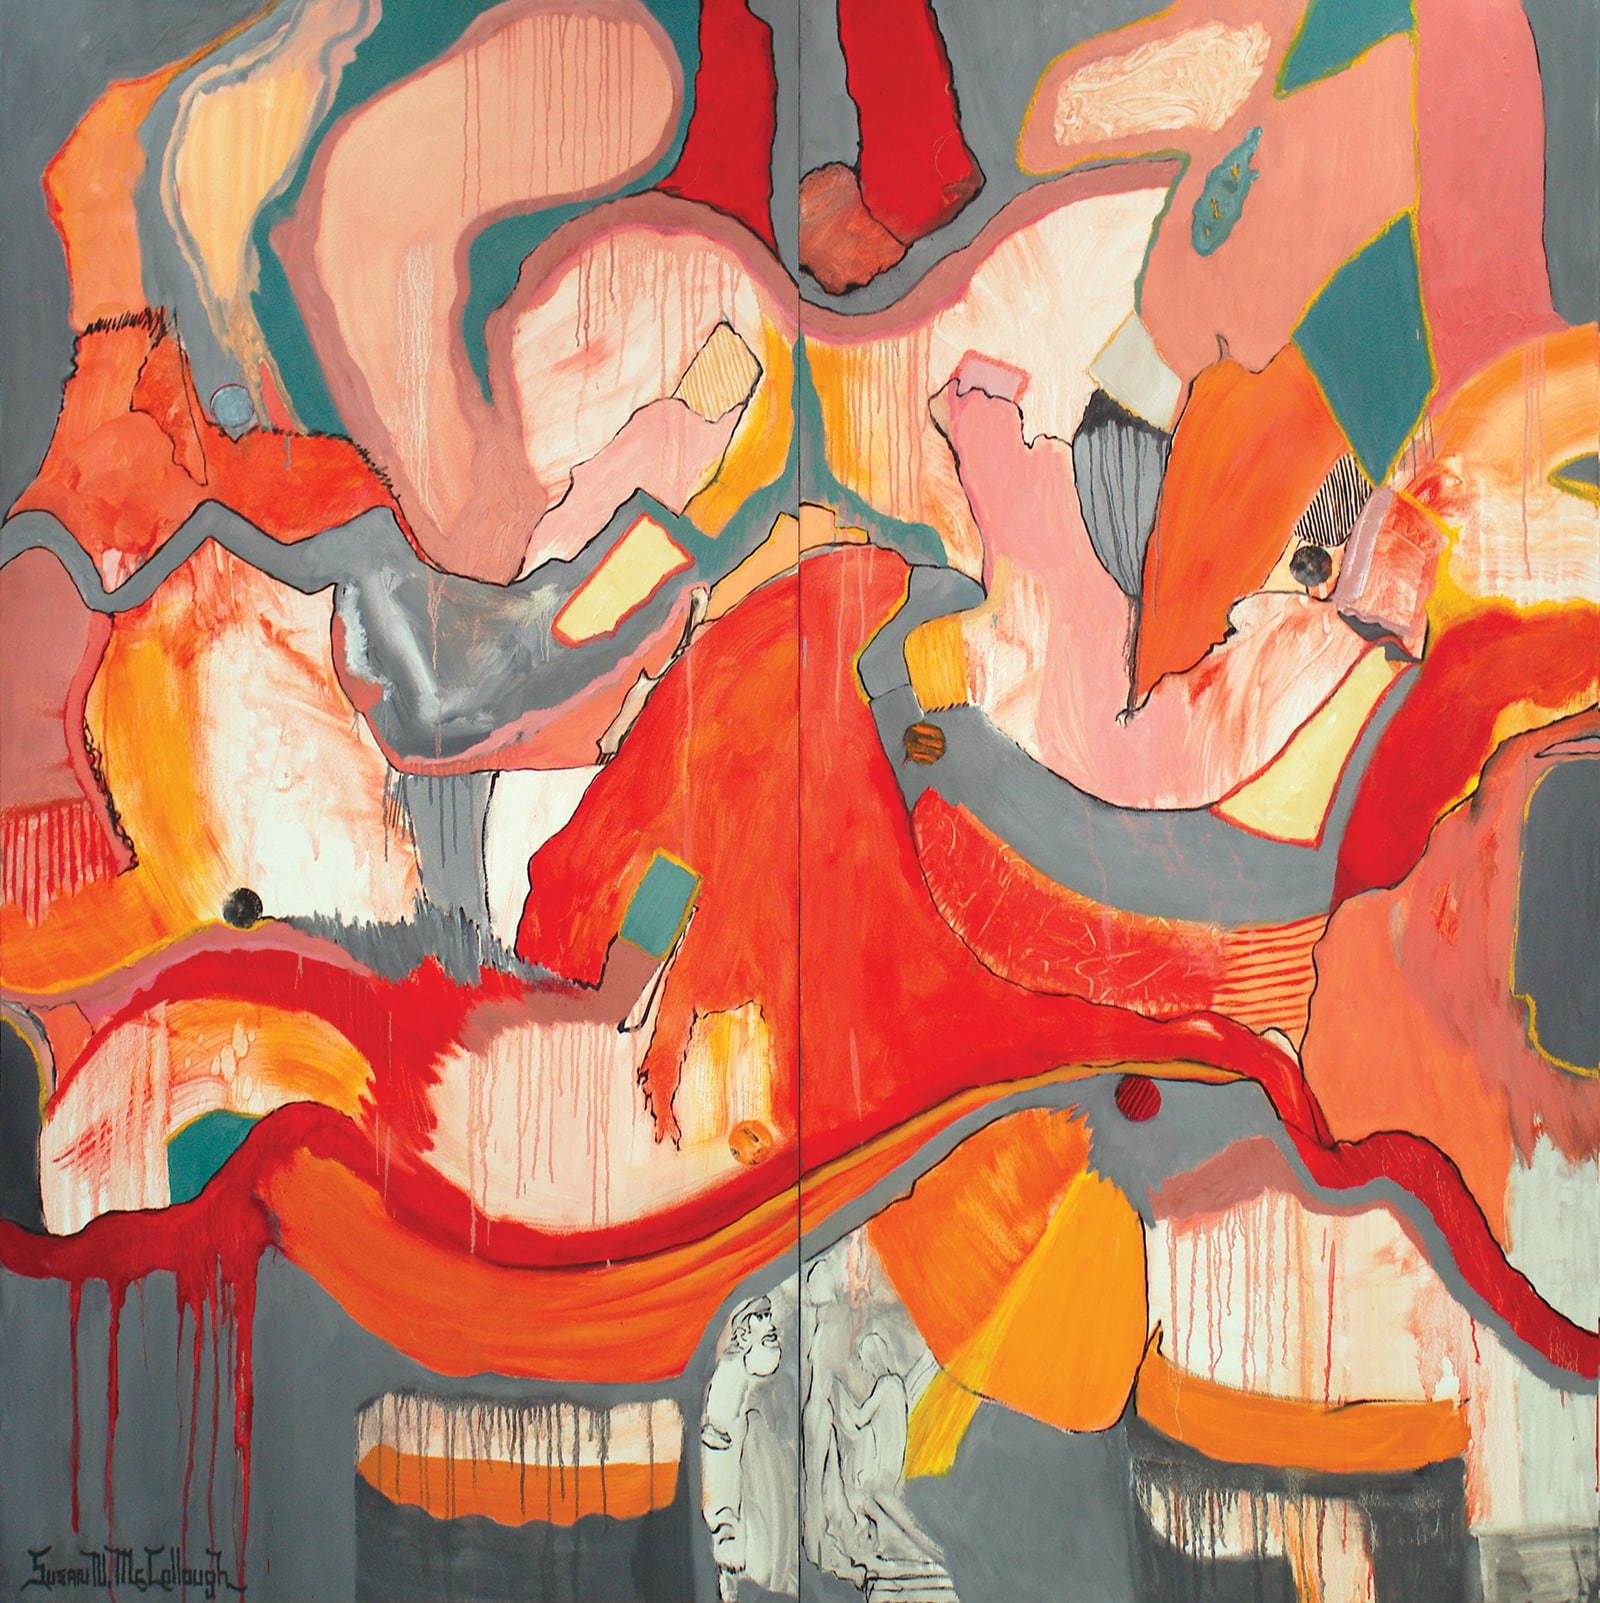 “Counterpart I & II” Diptych, Oil on Canvas, 72”x72” by Susan N. McCollough